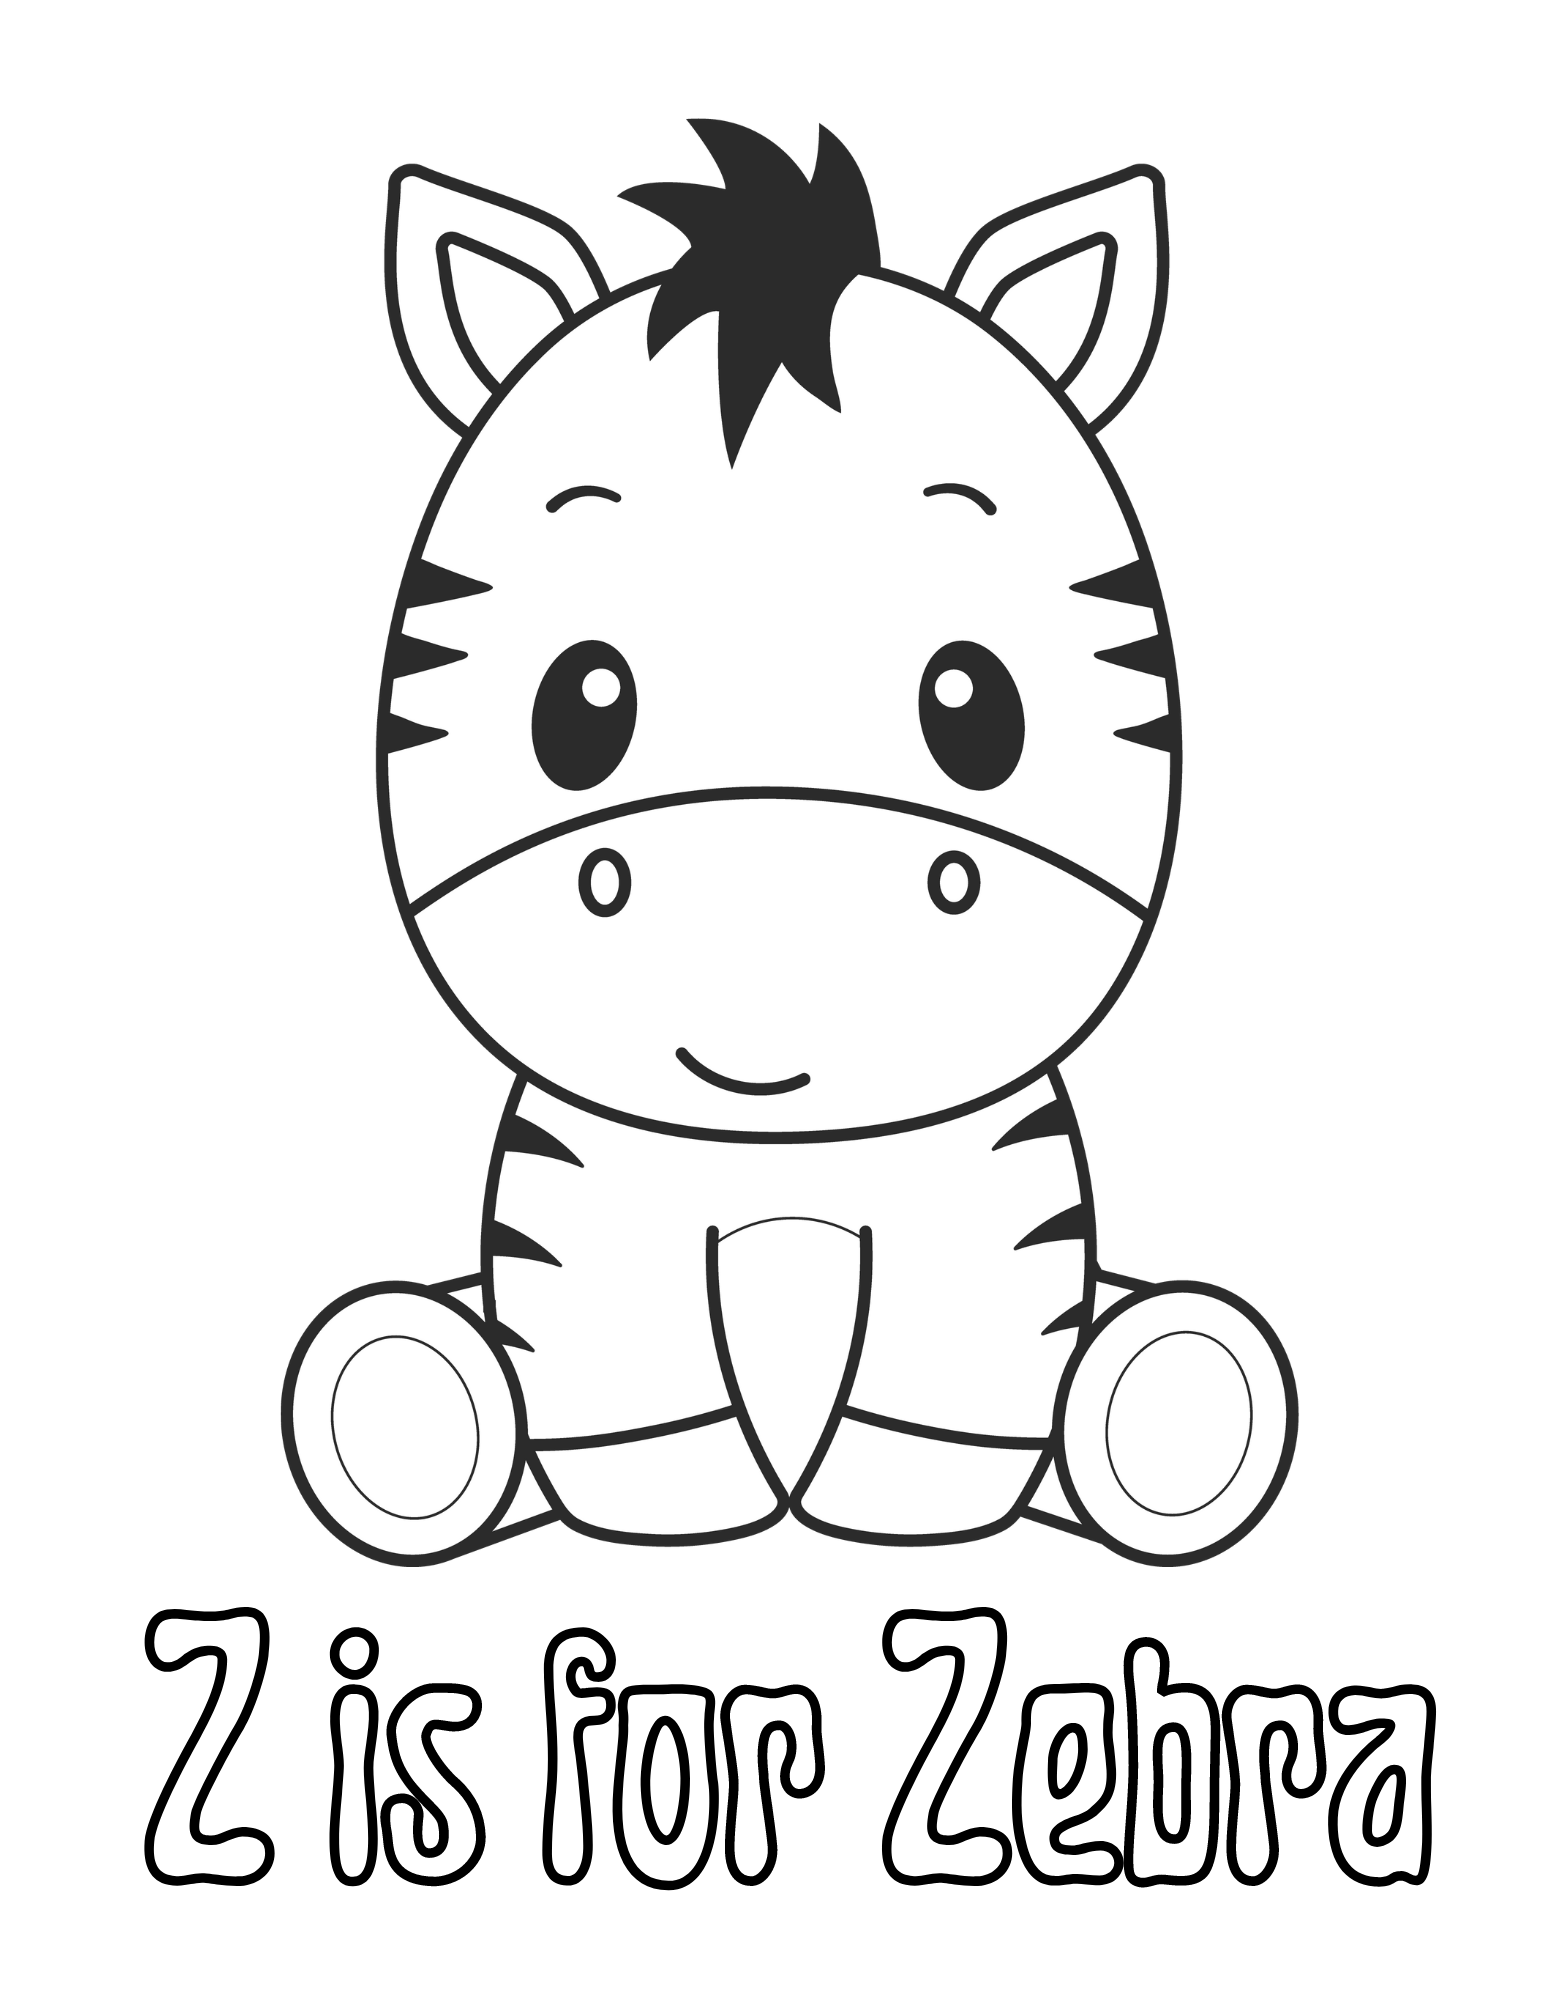 Fun zebra facts free printable zebra coloring pages